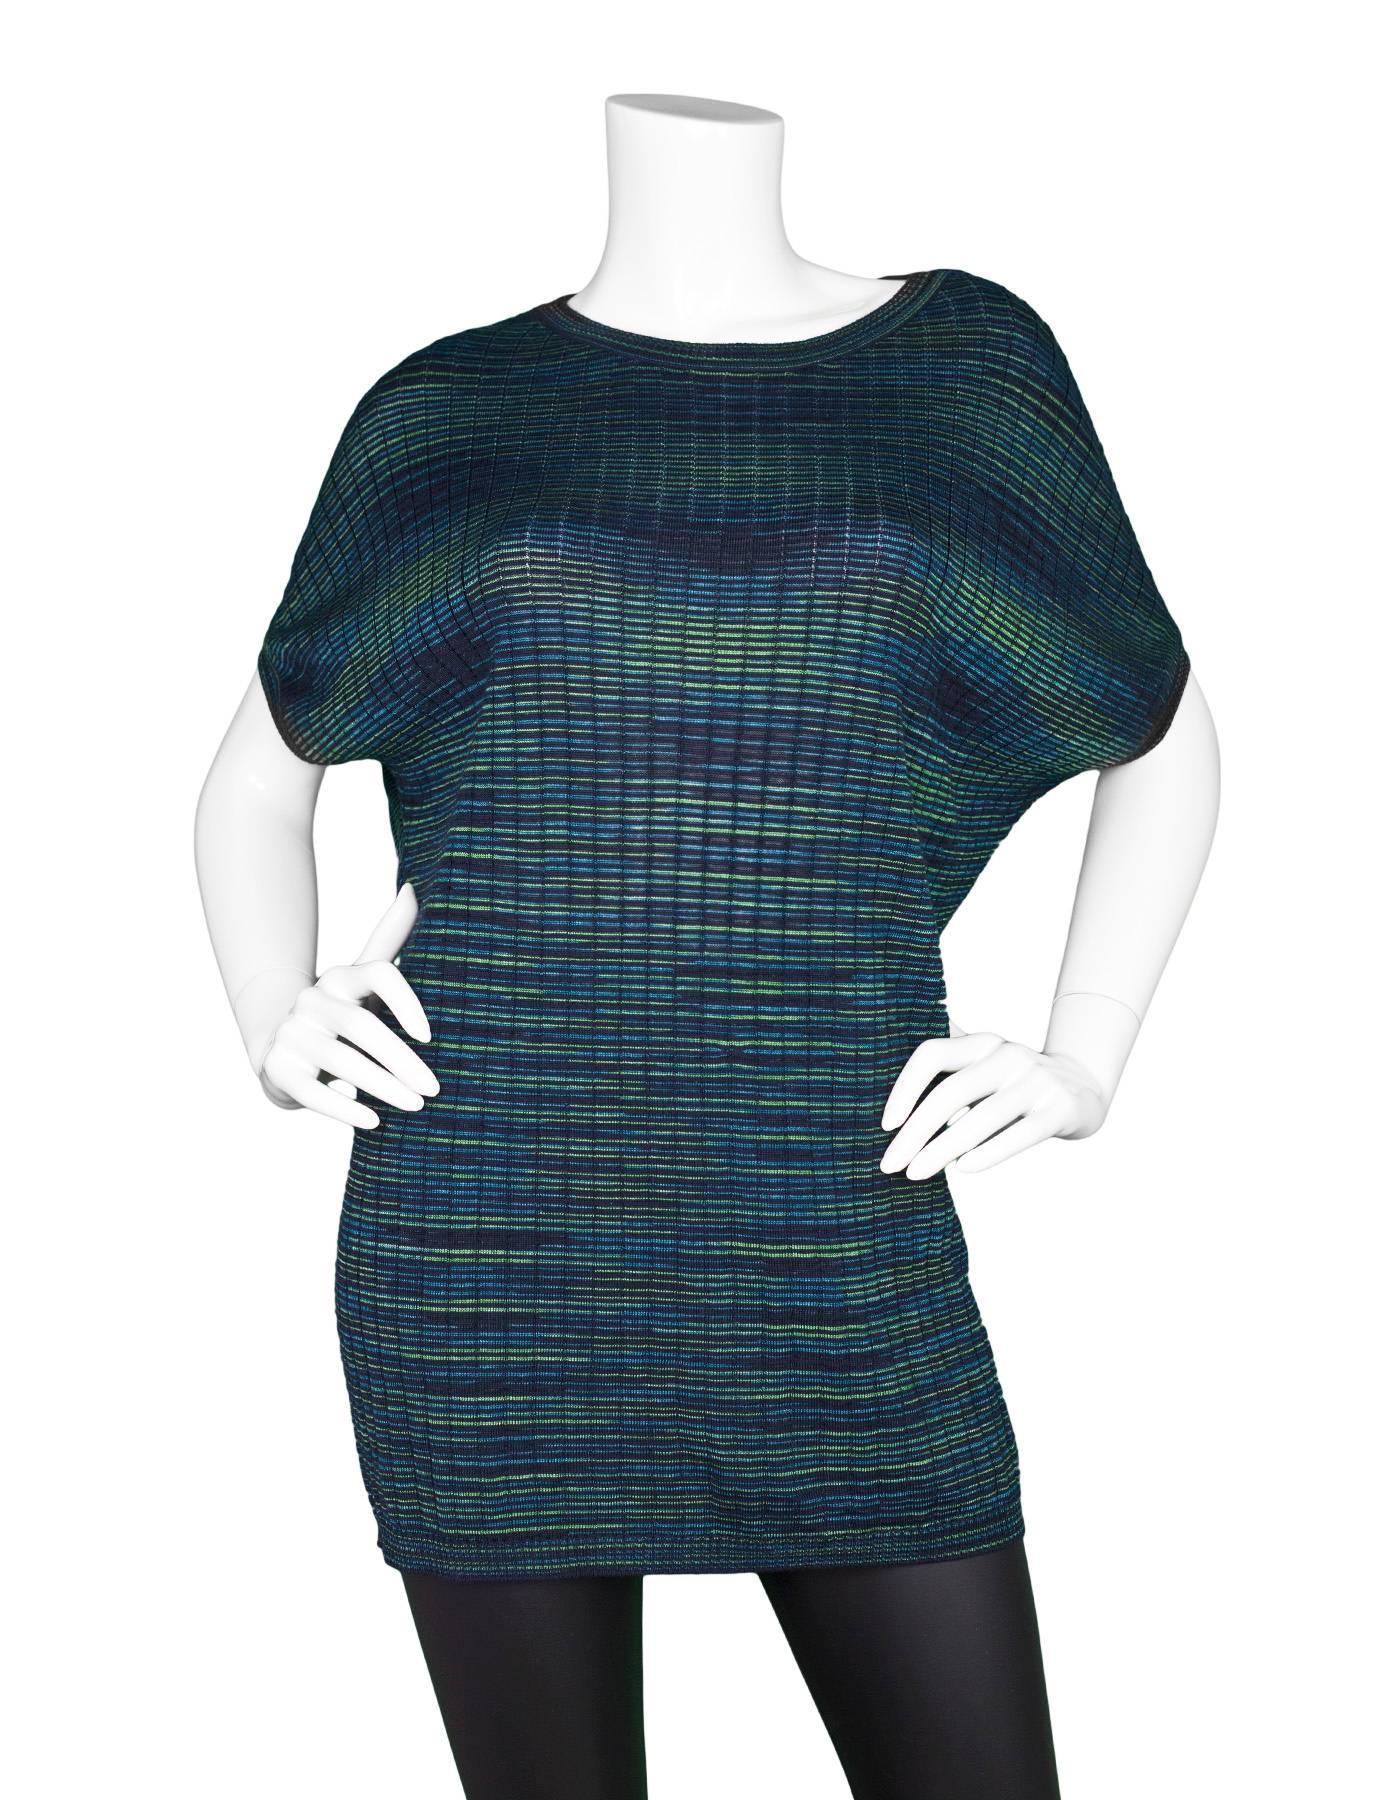 M Missoni Green and Navy Top Sz IT50

Made In: Italy
Color: Green, navy
Lining: None
Closure/Opening: Pull over
Exterior Pockets: None
Interior Pockets: None
Overall Condition: Excellent pre-owned condition
Marked Size: IT50 / US 14
Bust: